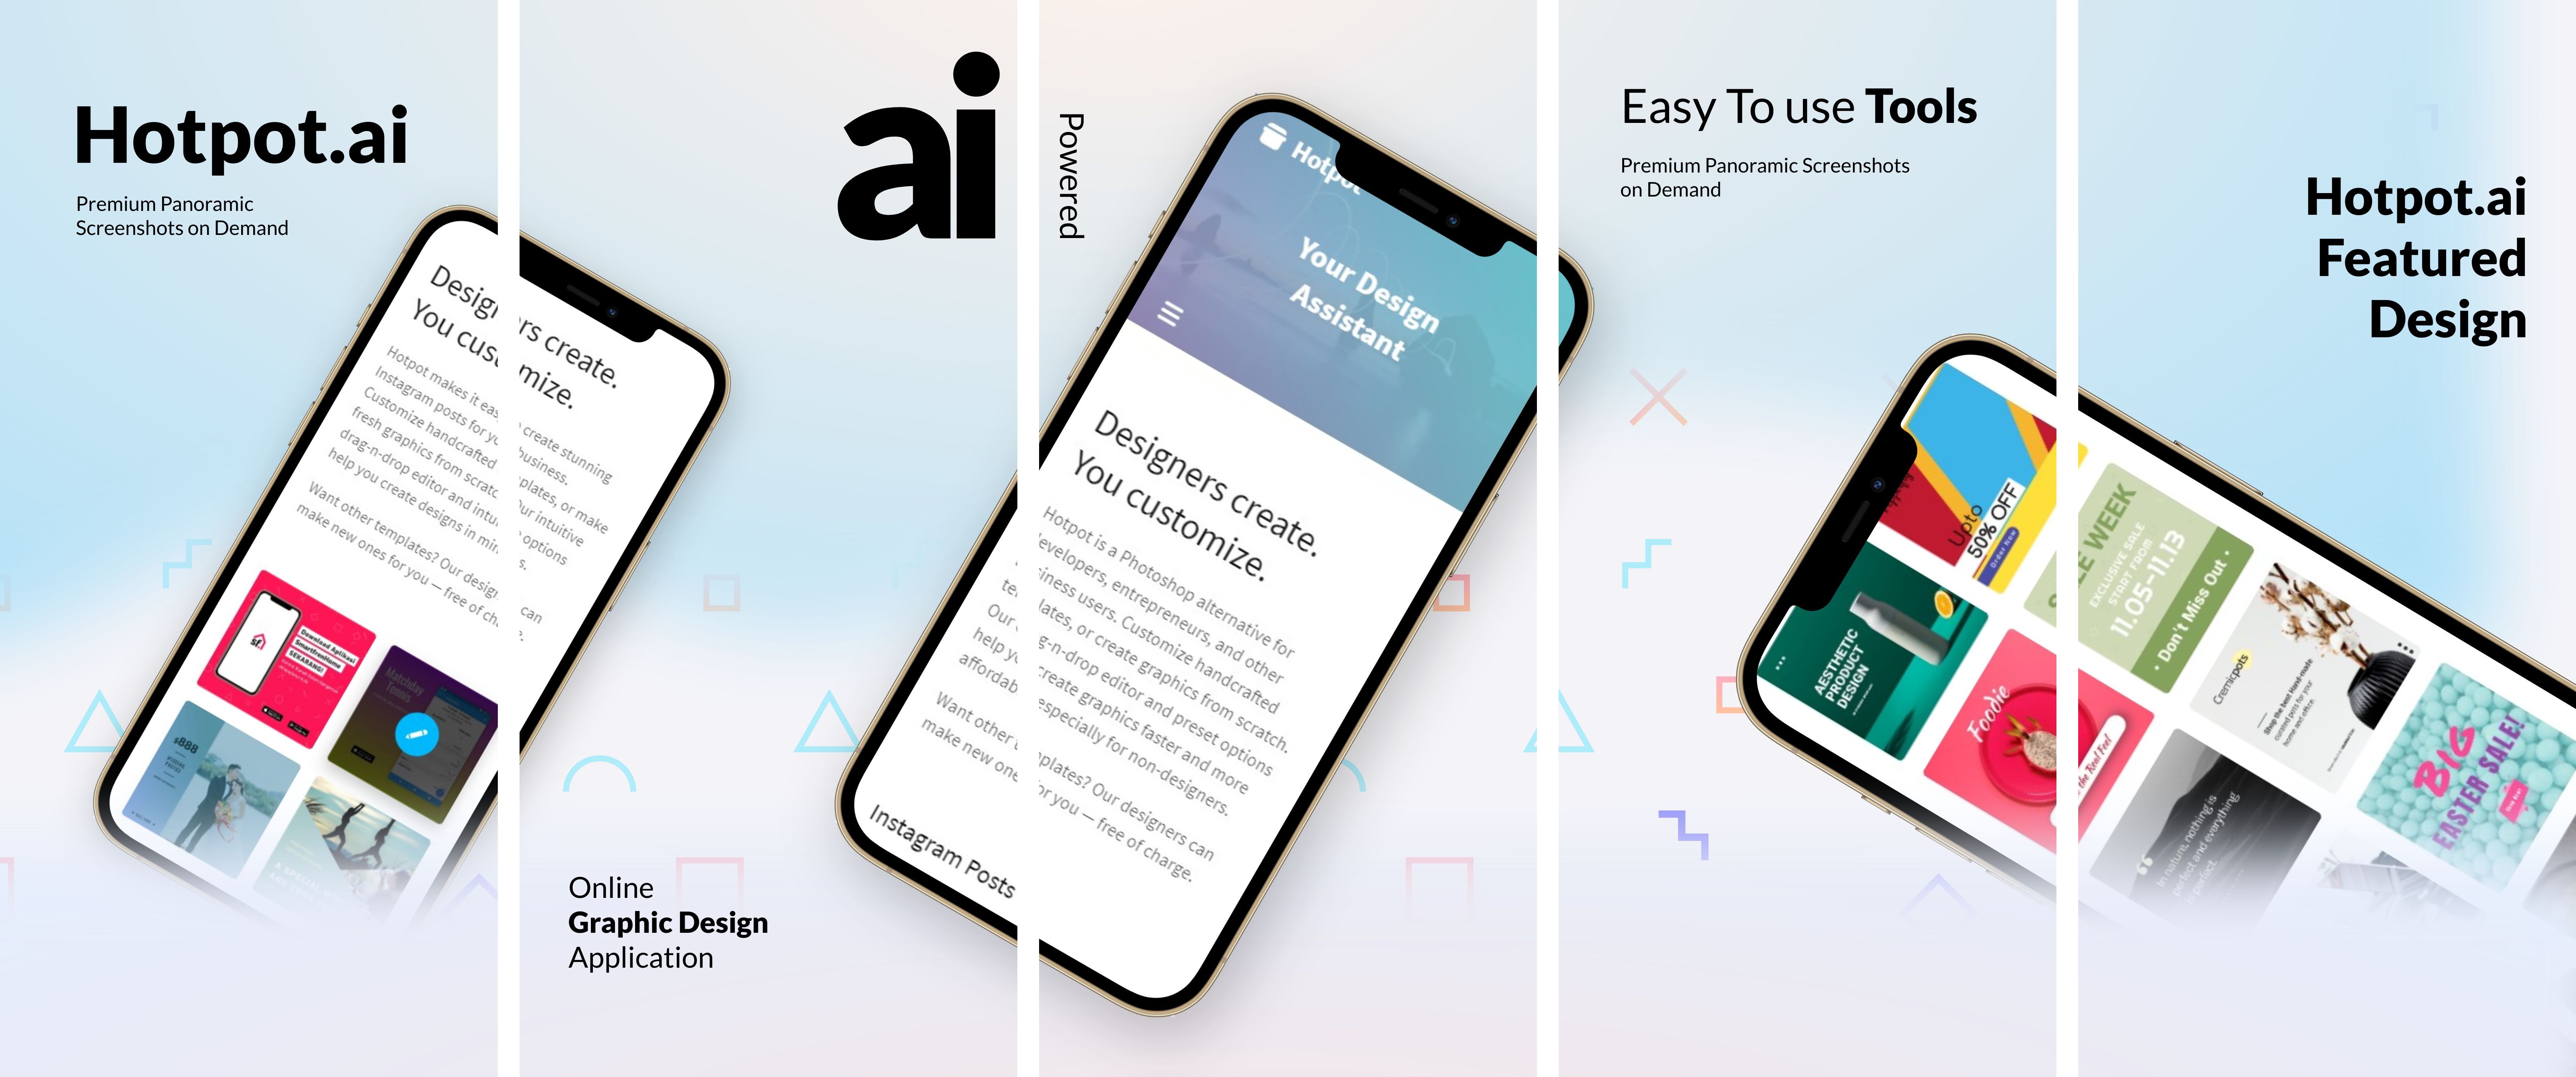 App Store Panorama Screenshot - iPhone 12 Pro Max 9 template. Quickly edit text, colors, images, and more for free.